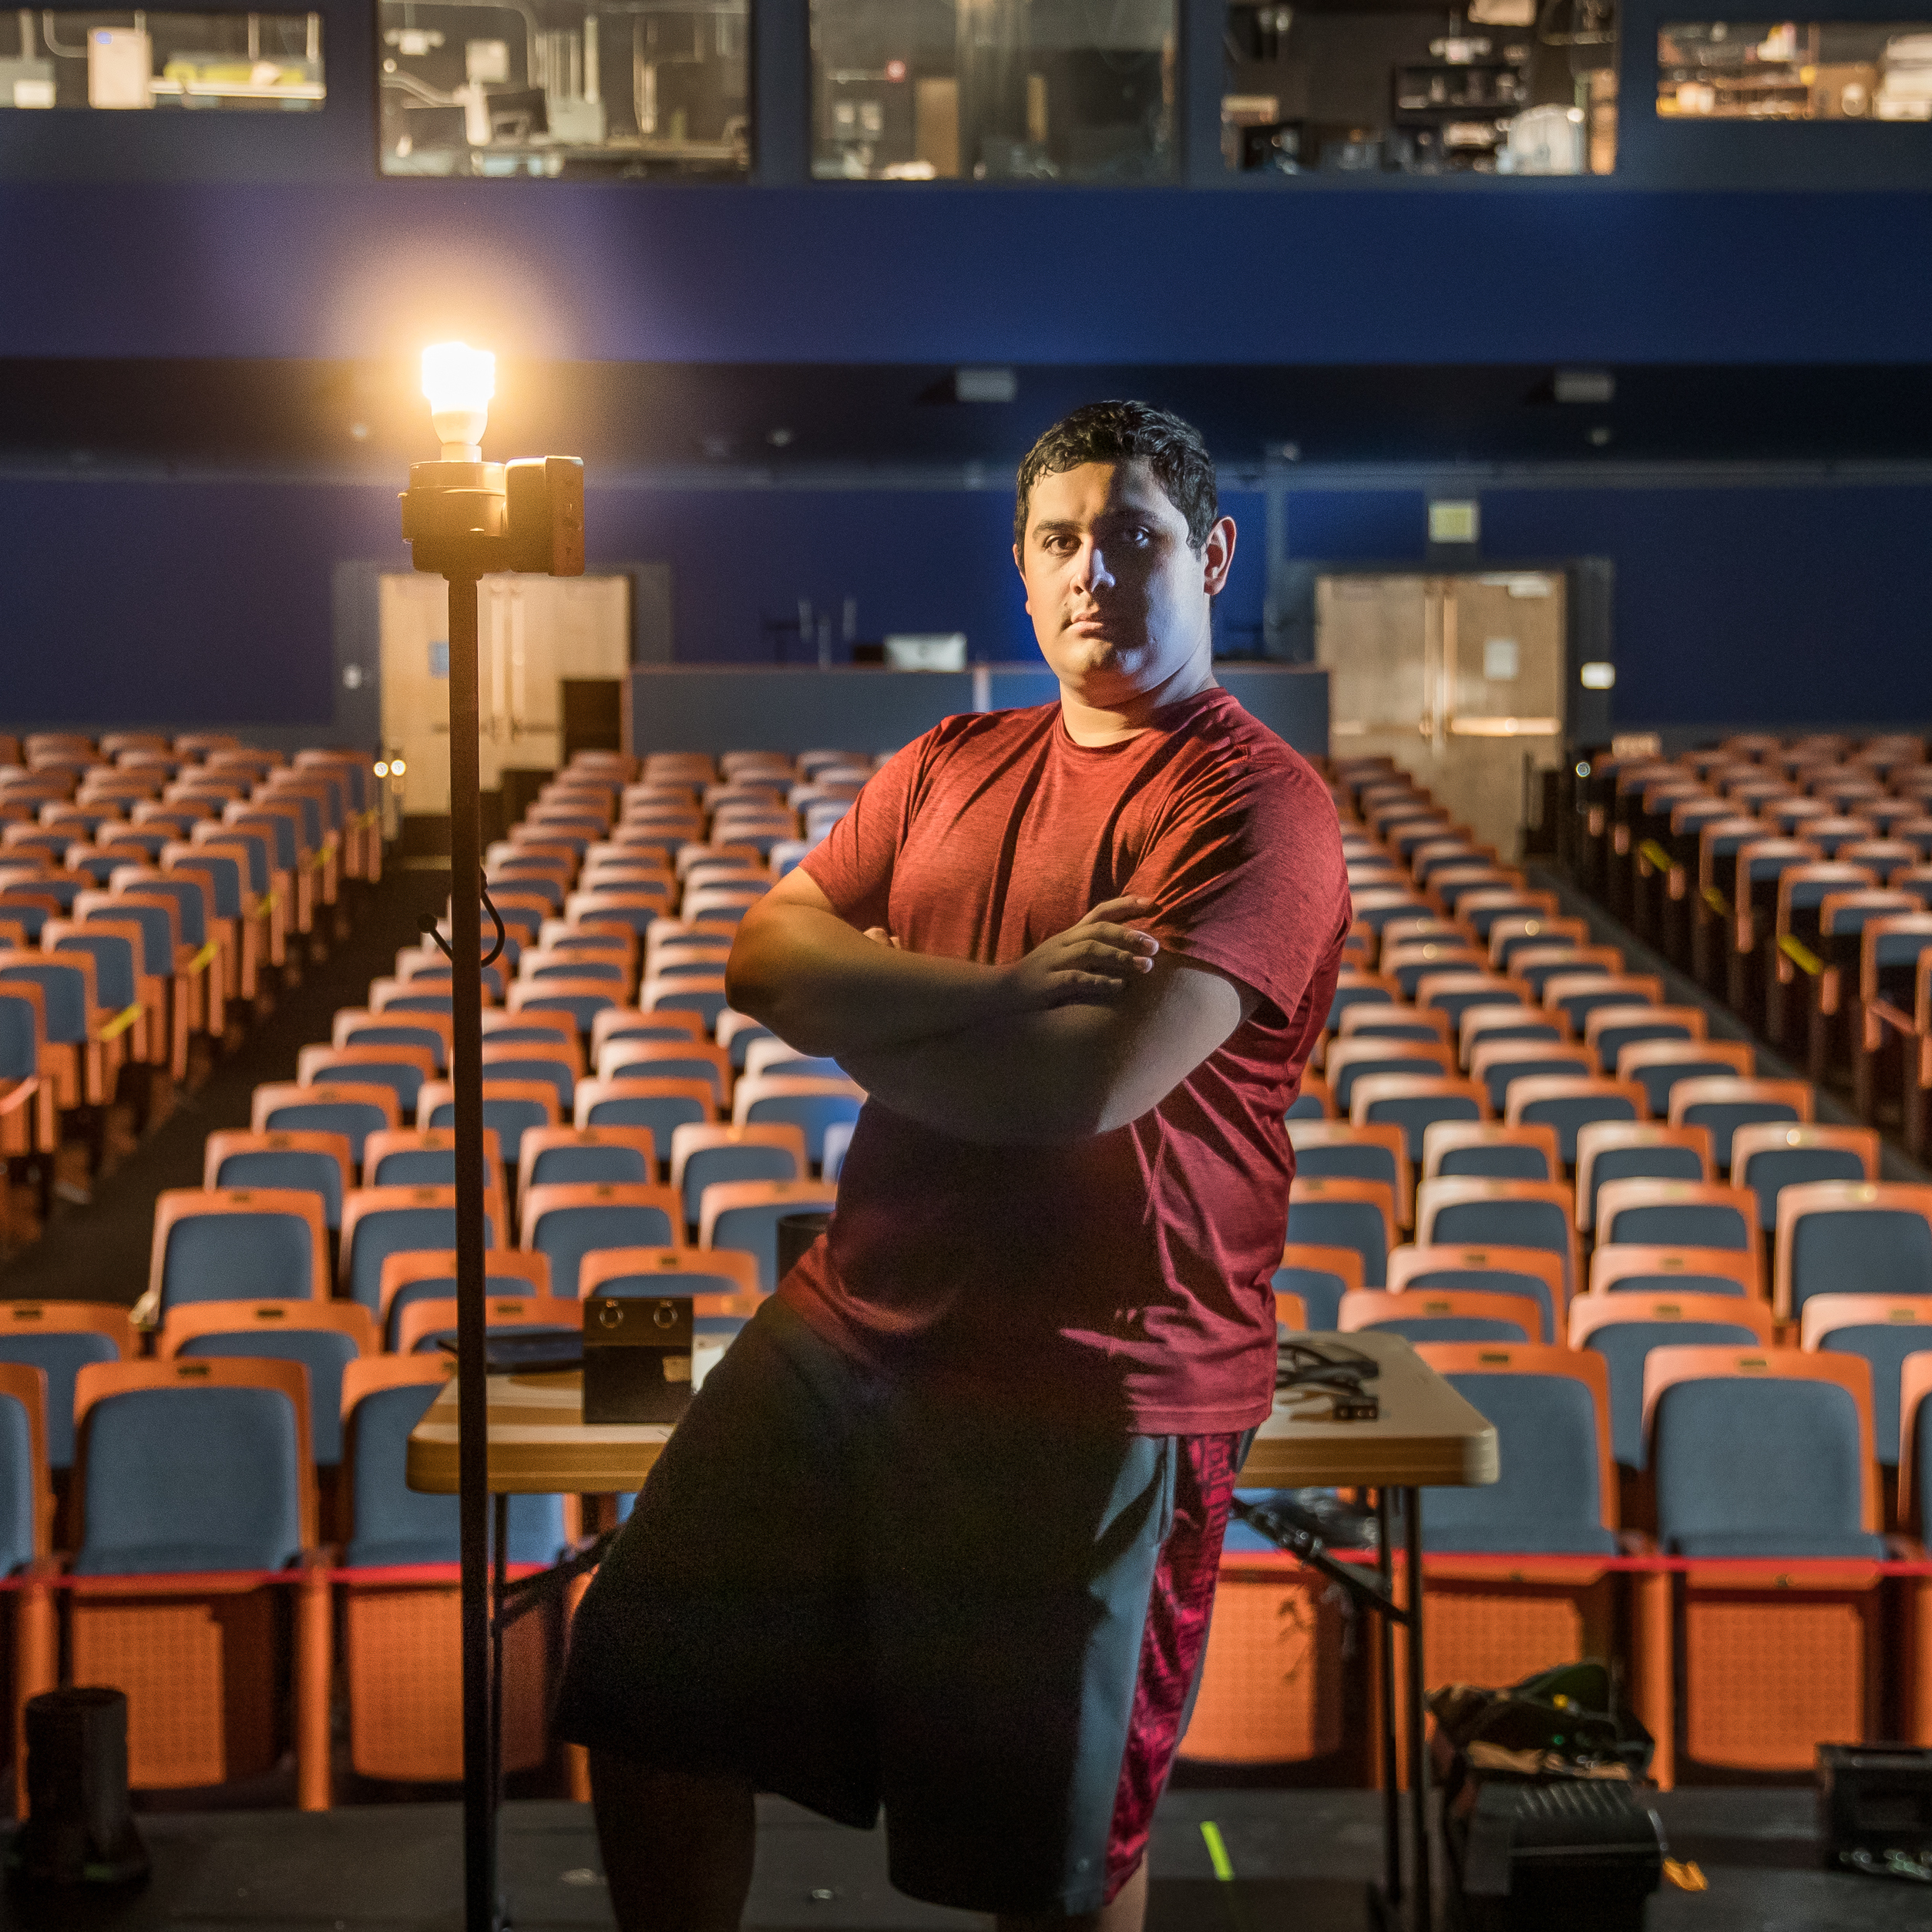 Theatre student Arteaga stands on stage before empty theater